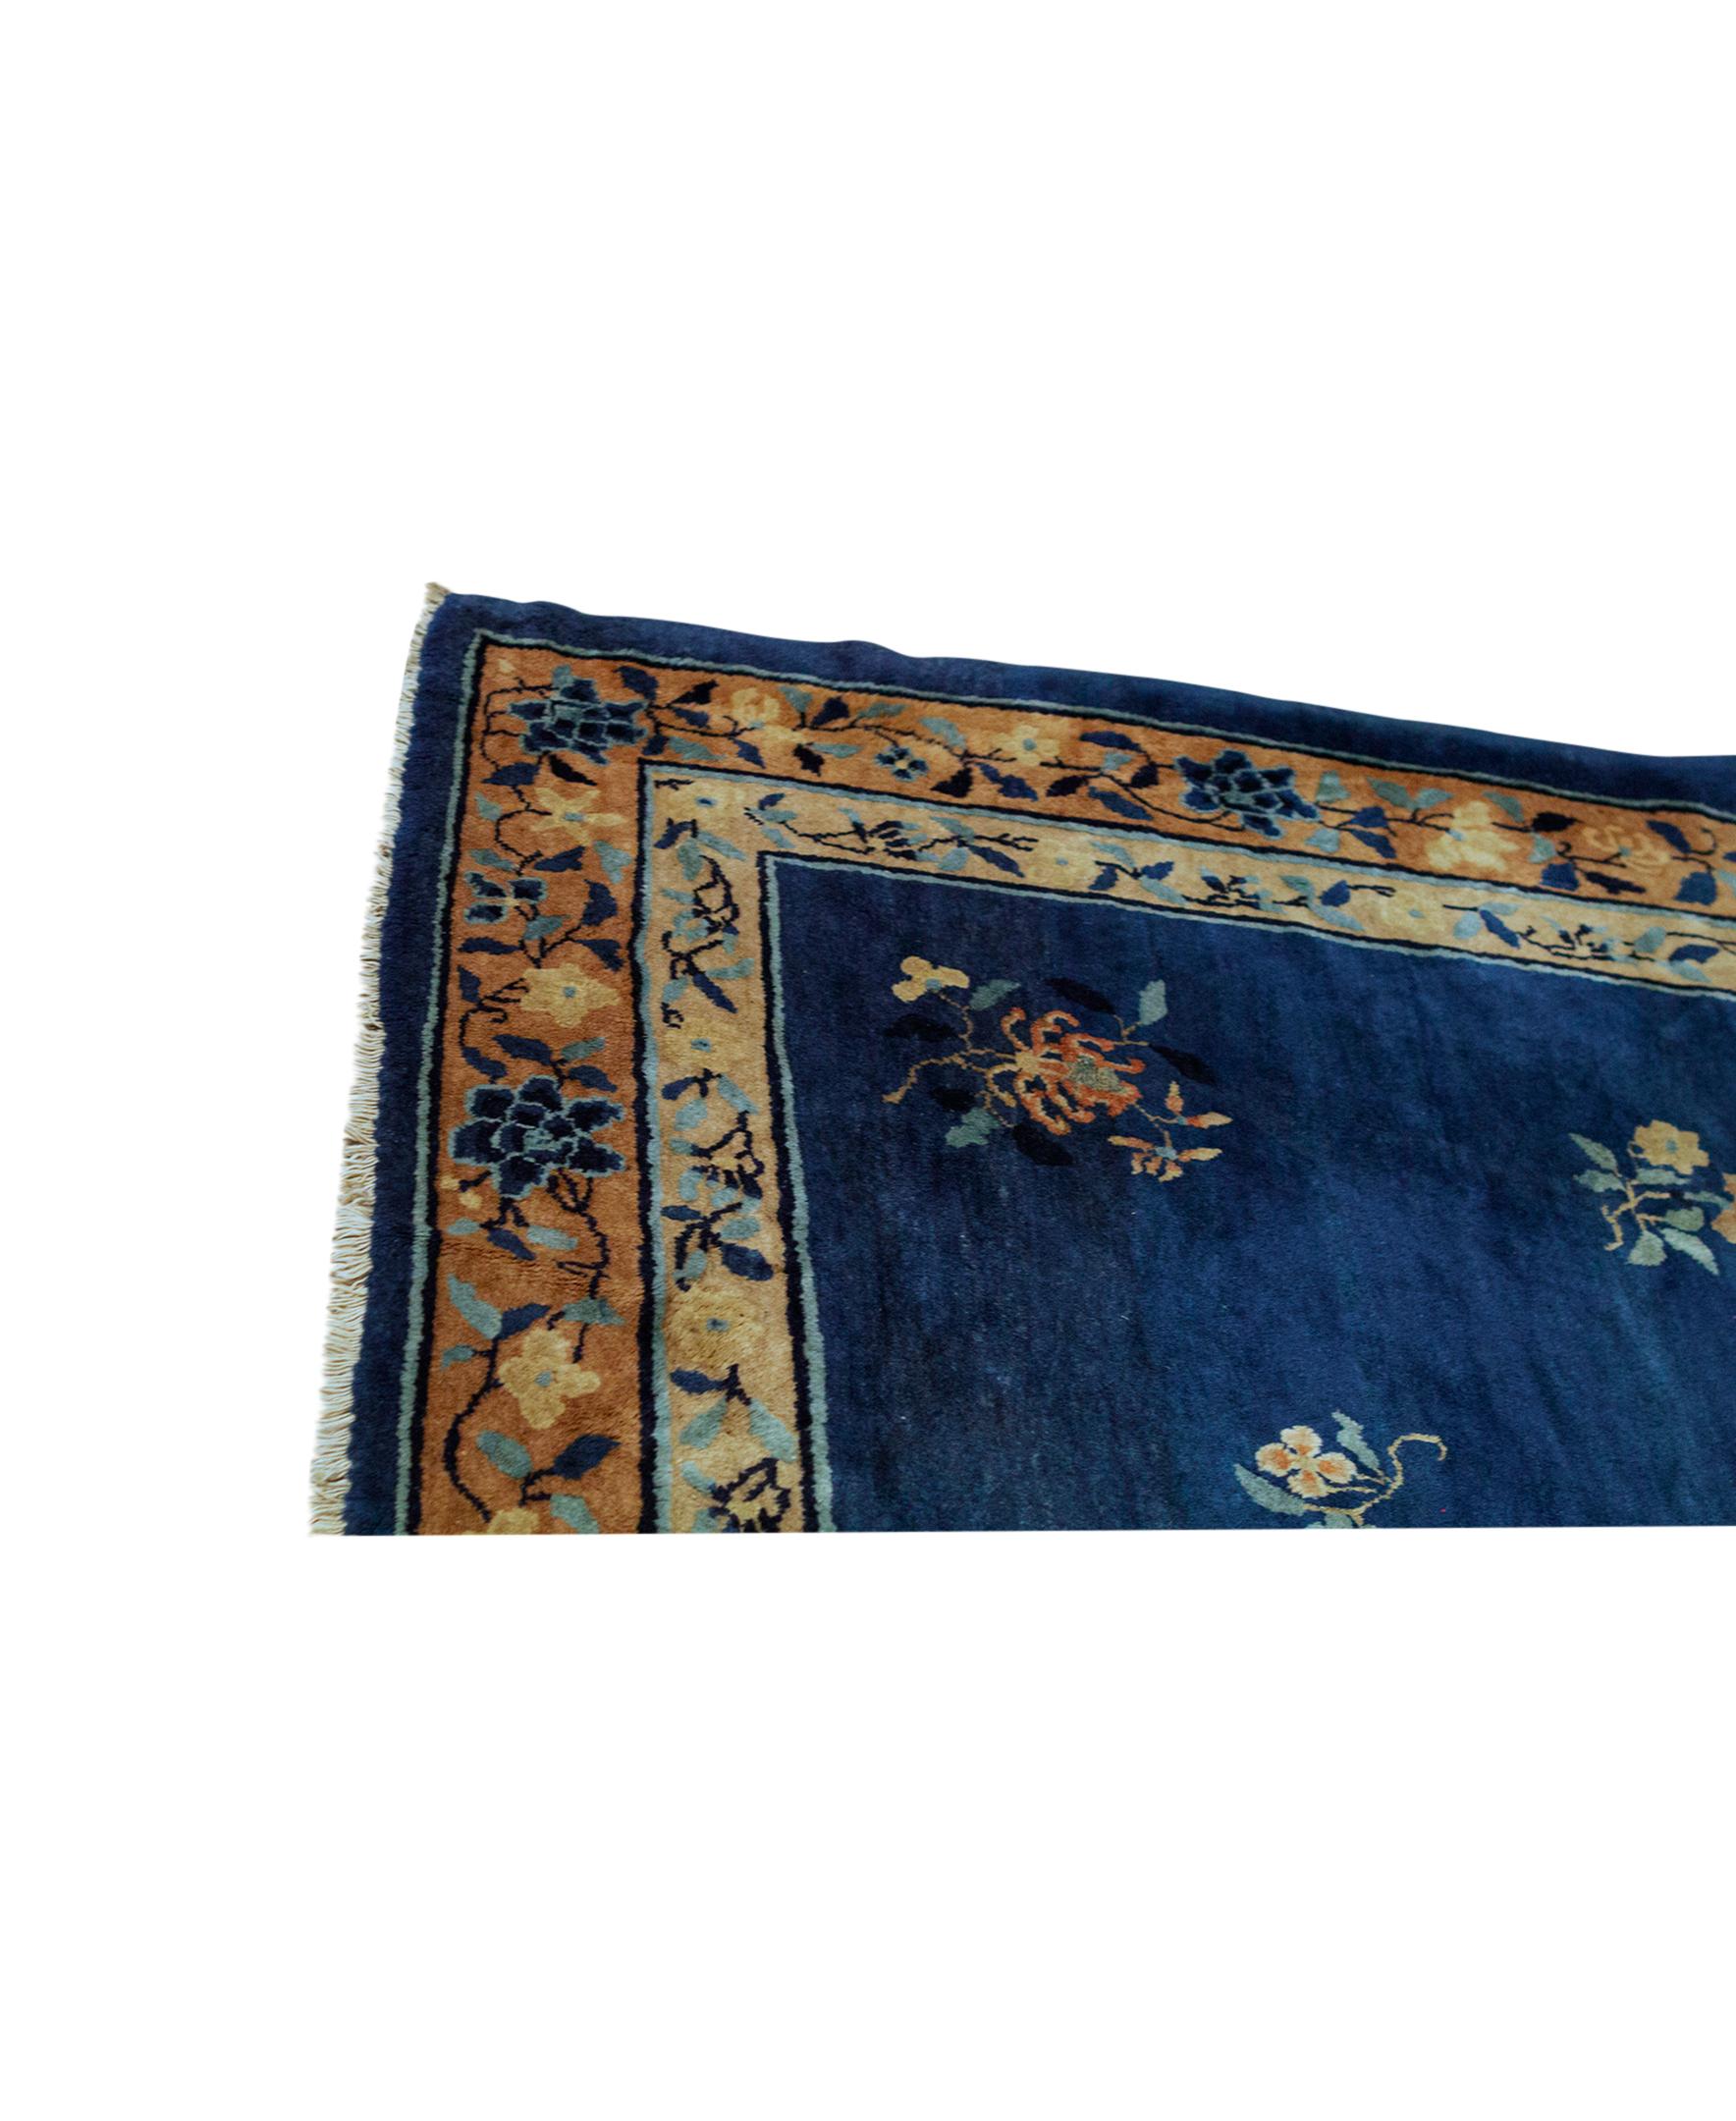 This elegantly hand woven rug is from China and woven from the finest wools to create a soft and luxurious piece that will work well in so many different settings. Size: 11'-1